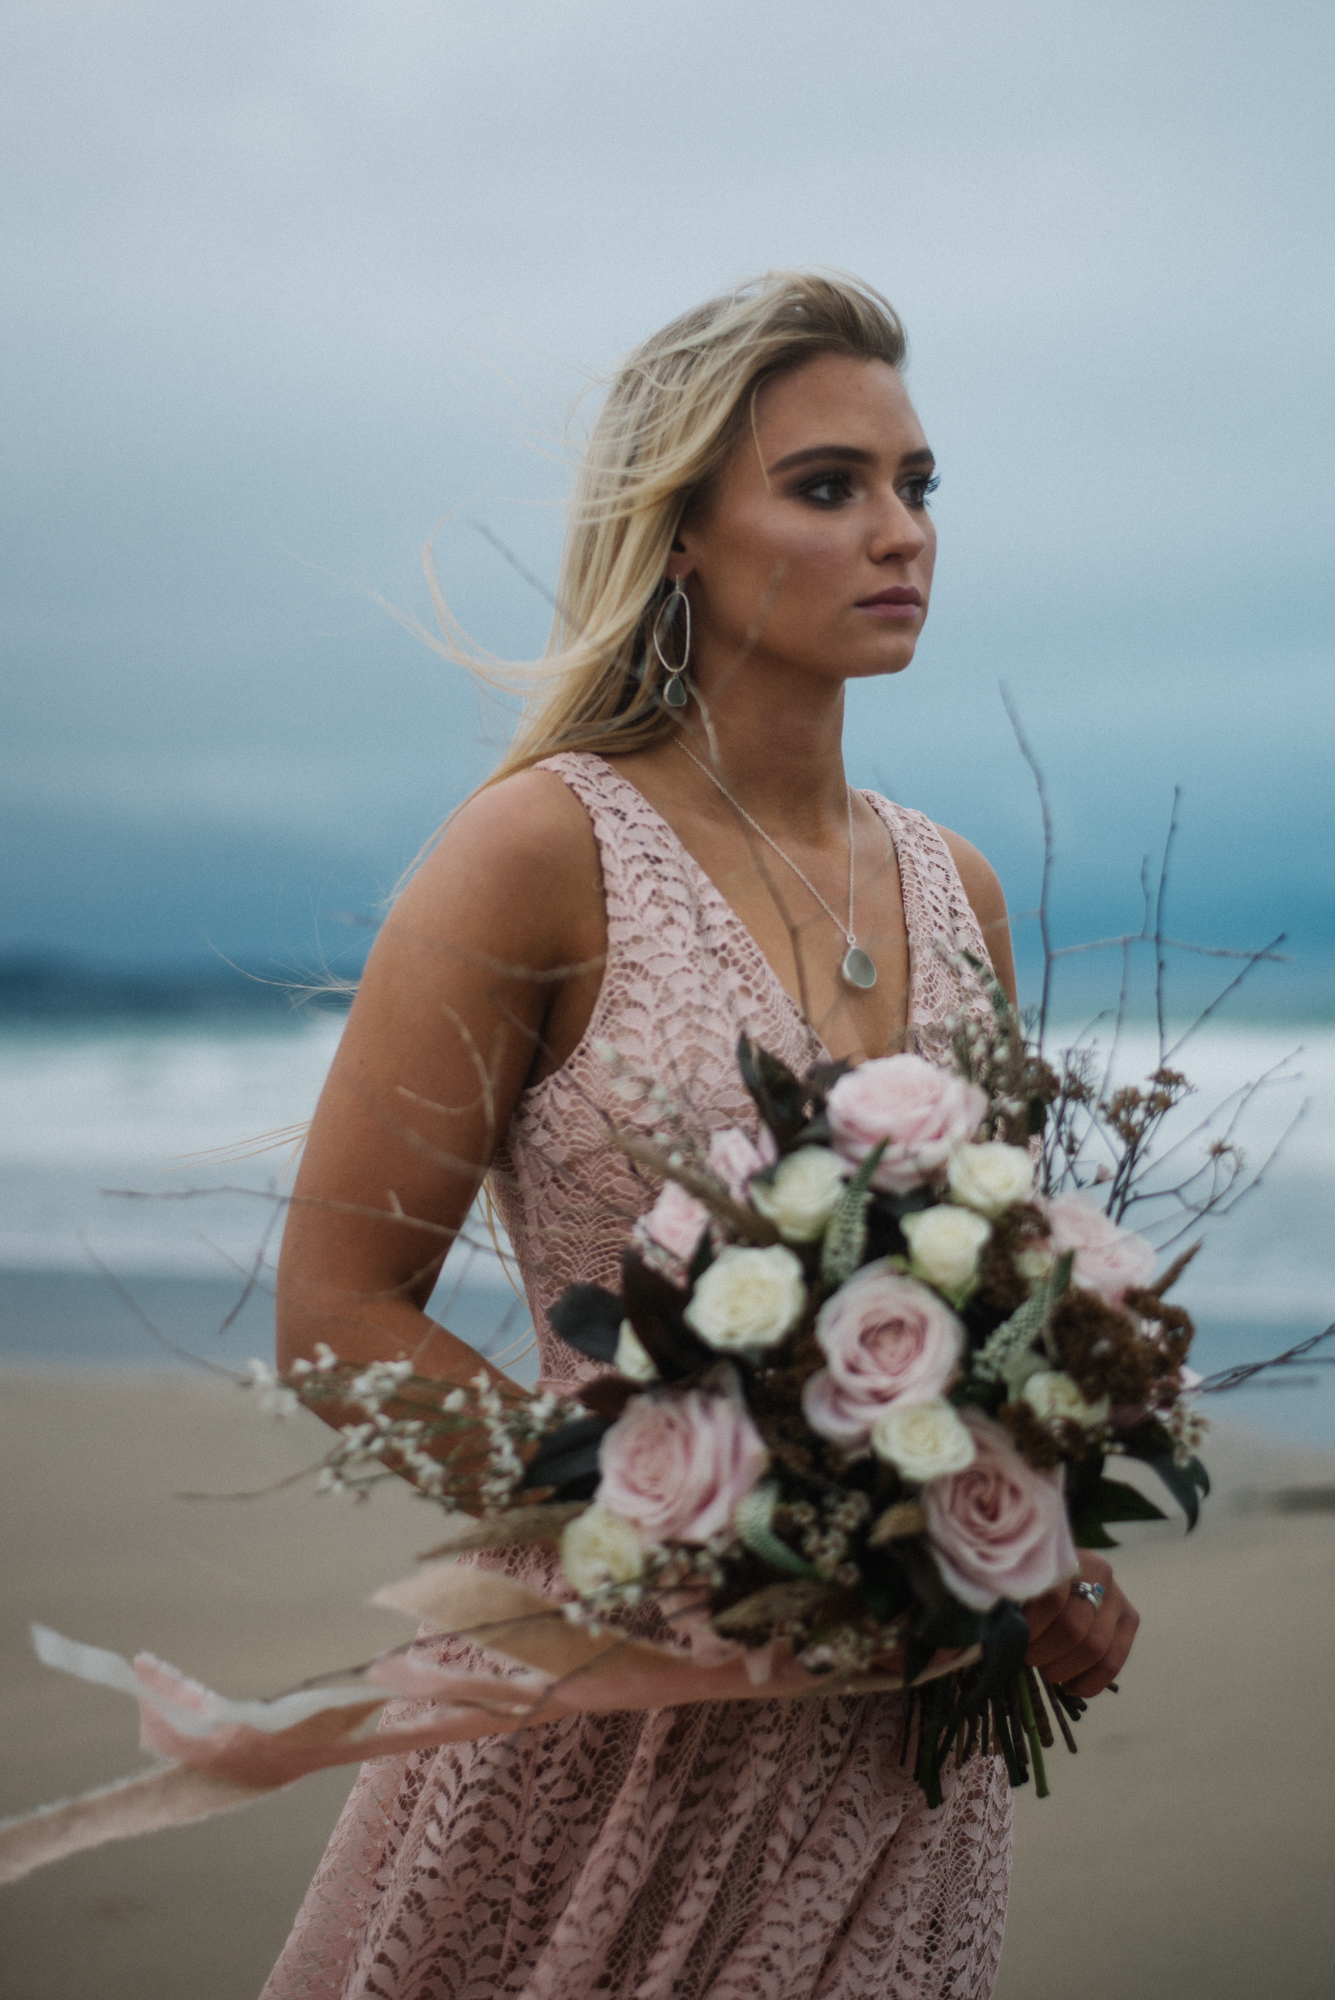 Lucie On The Beach | Bridal Editorial | www.oliviablogs.com